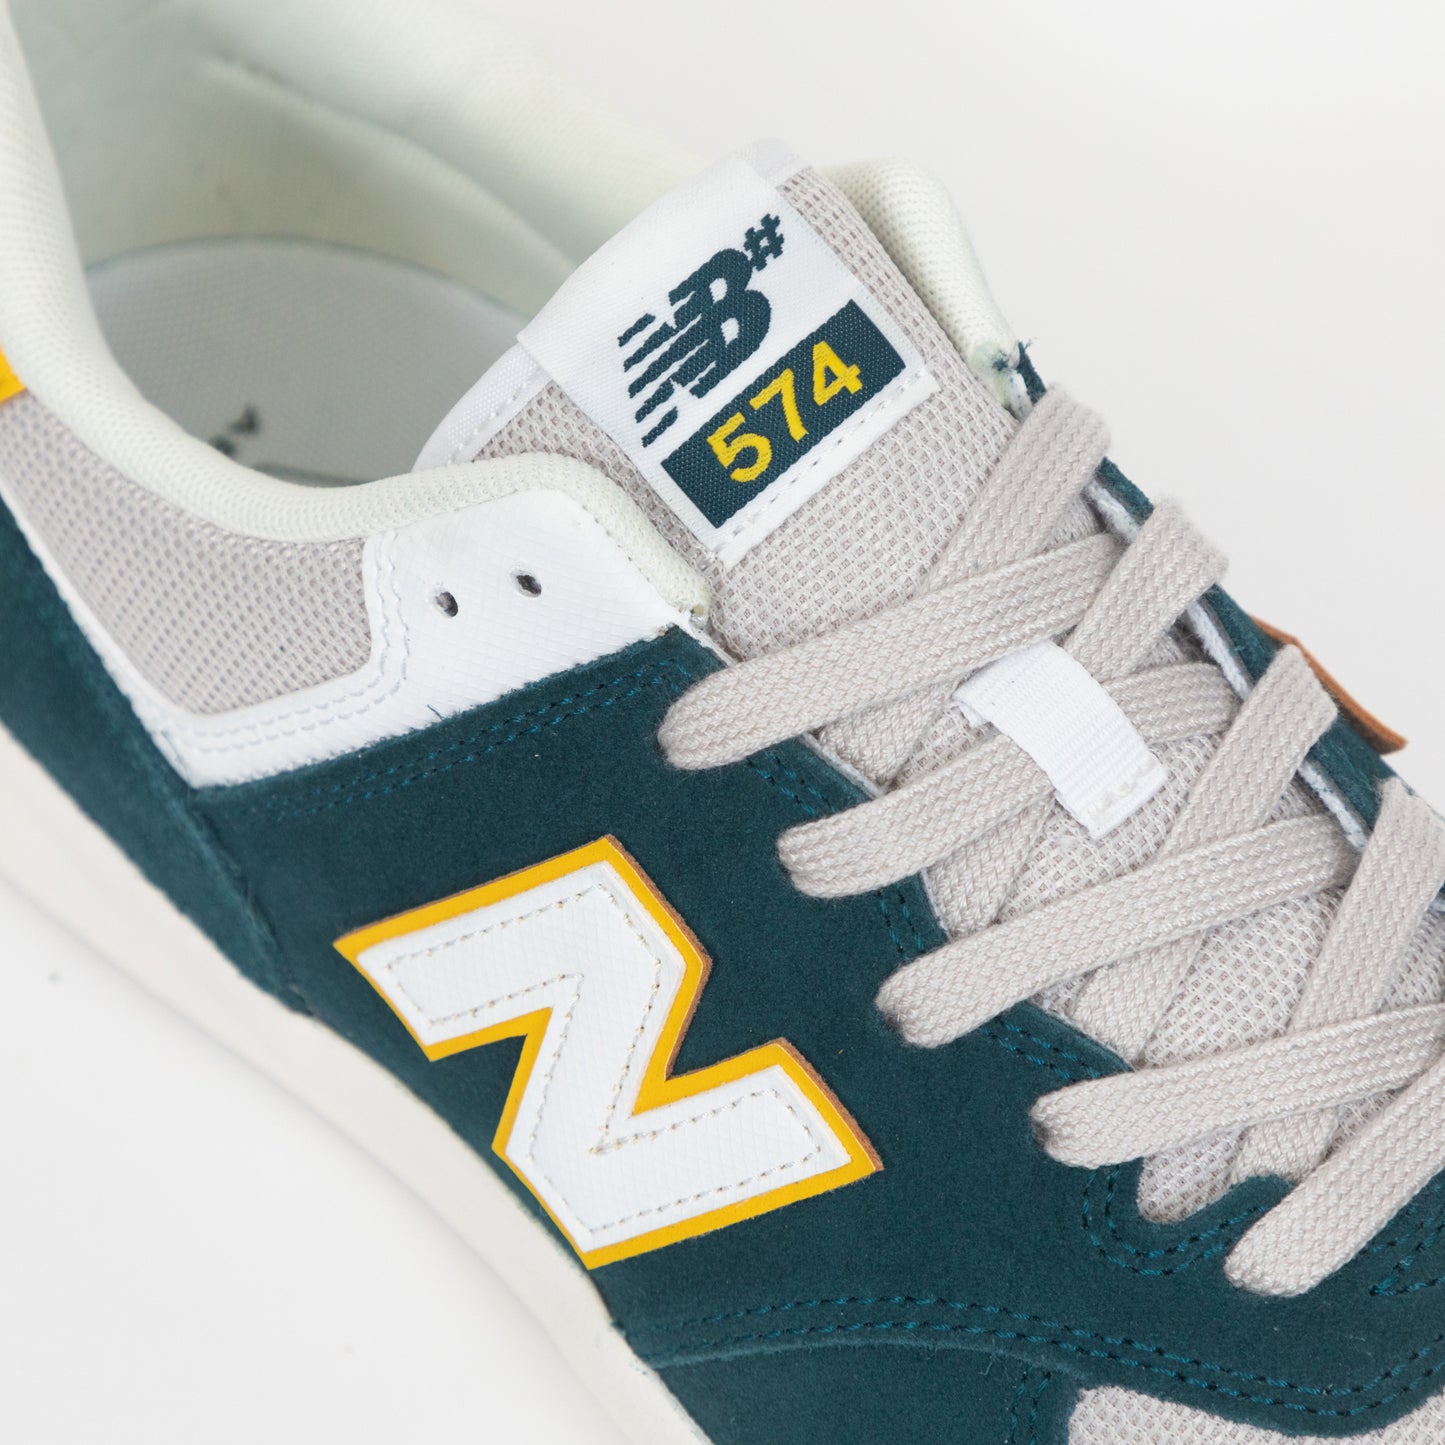 NEW BALANCE Numeric 574 Vulc Trainers in TEAL & WHITE